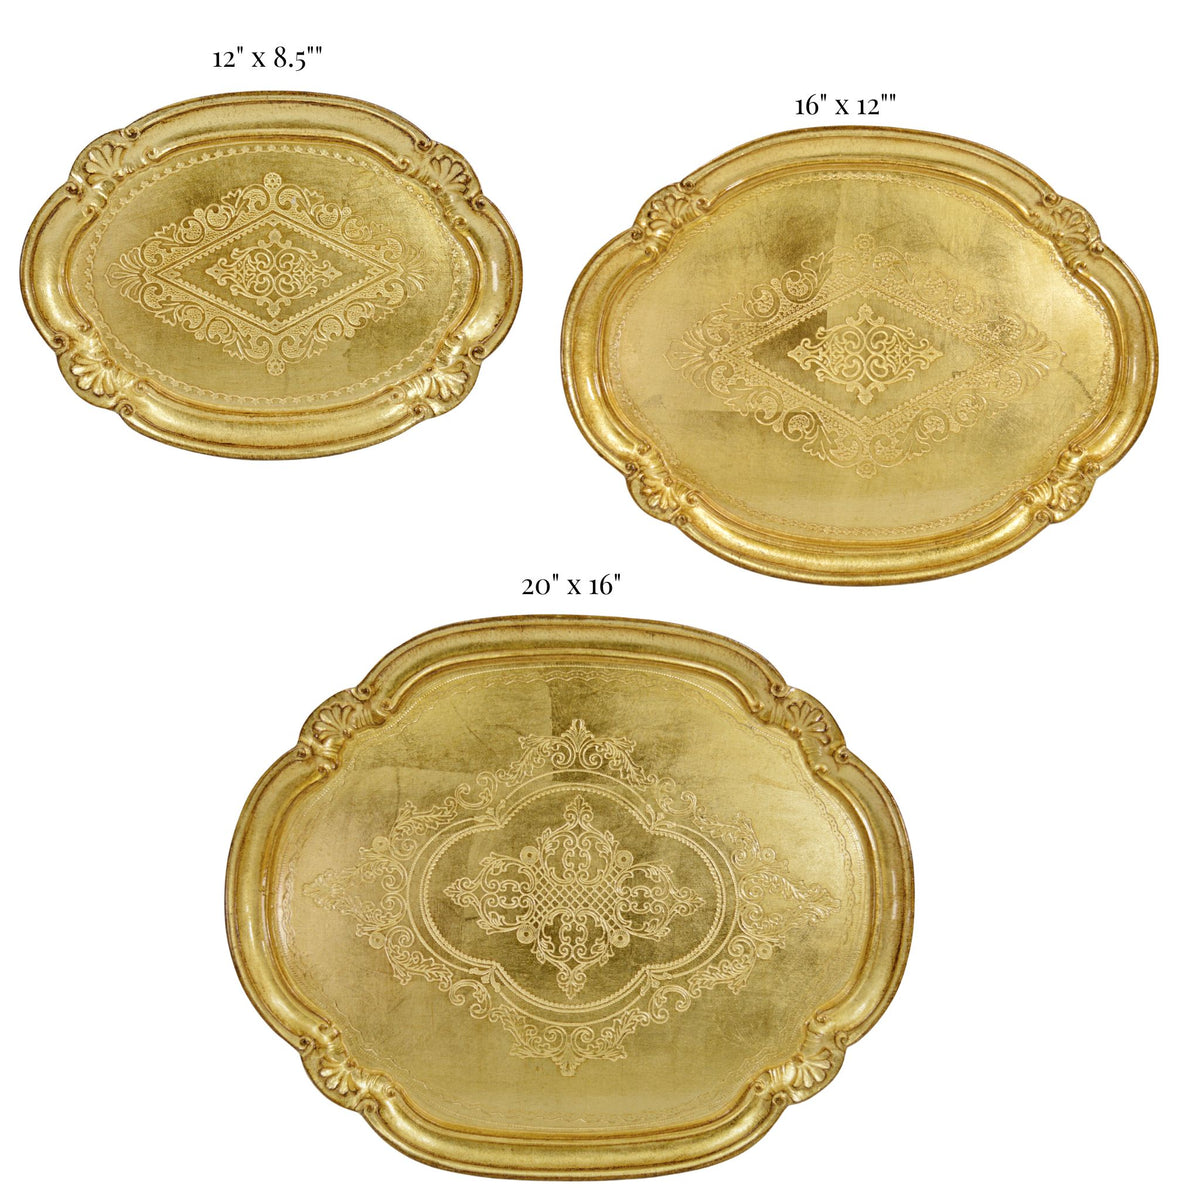 Florentine Carved Wood Oval Tray, Multiple colors and sizes - My Italian Decor